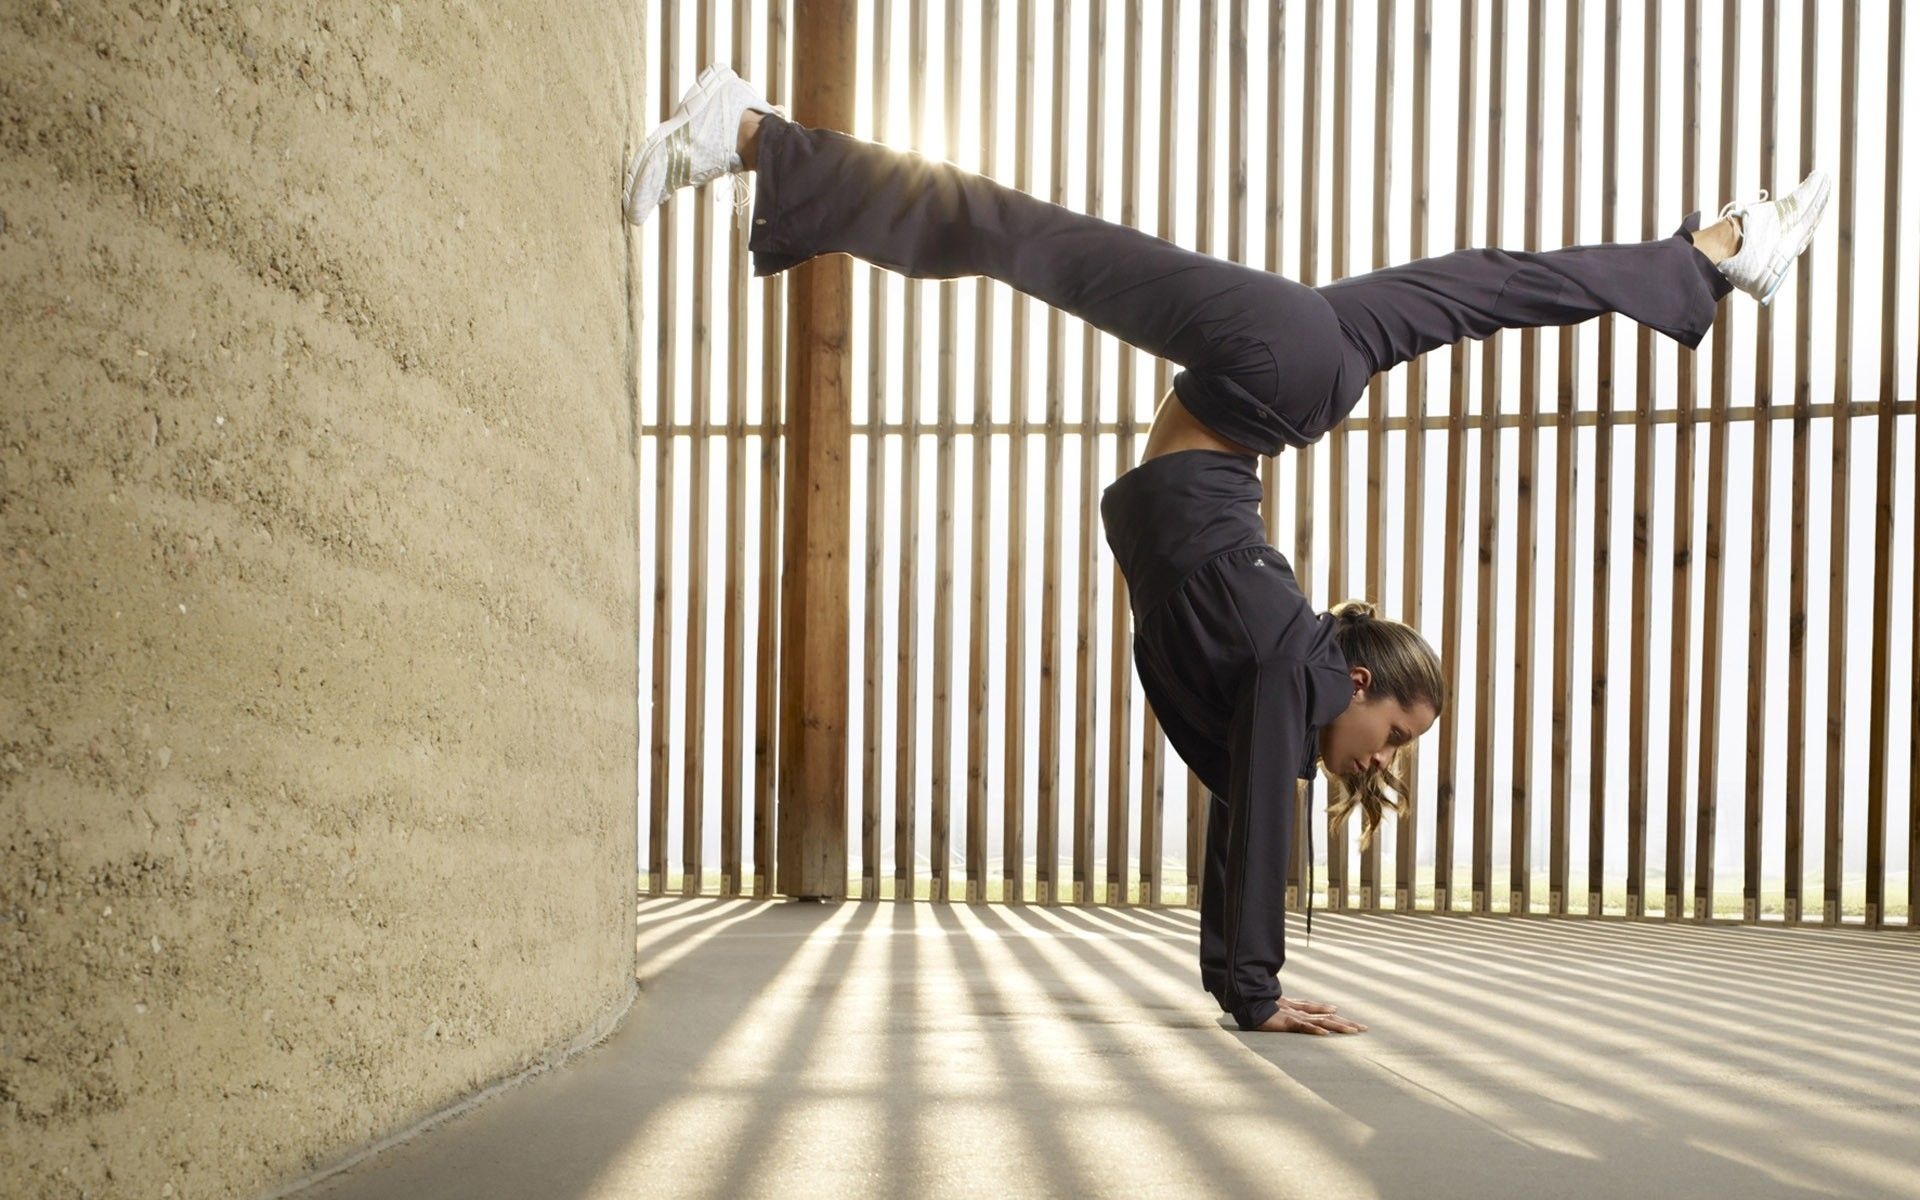 Acrobatic Sports: Handstand, Strength workout, Split, Balance exercise. 1920x1200 HD Wallpaper.